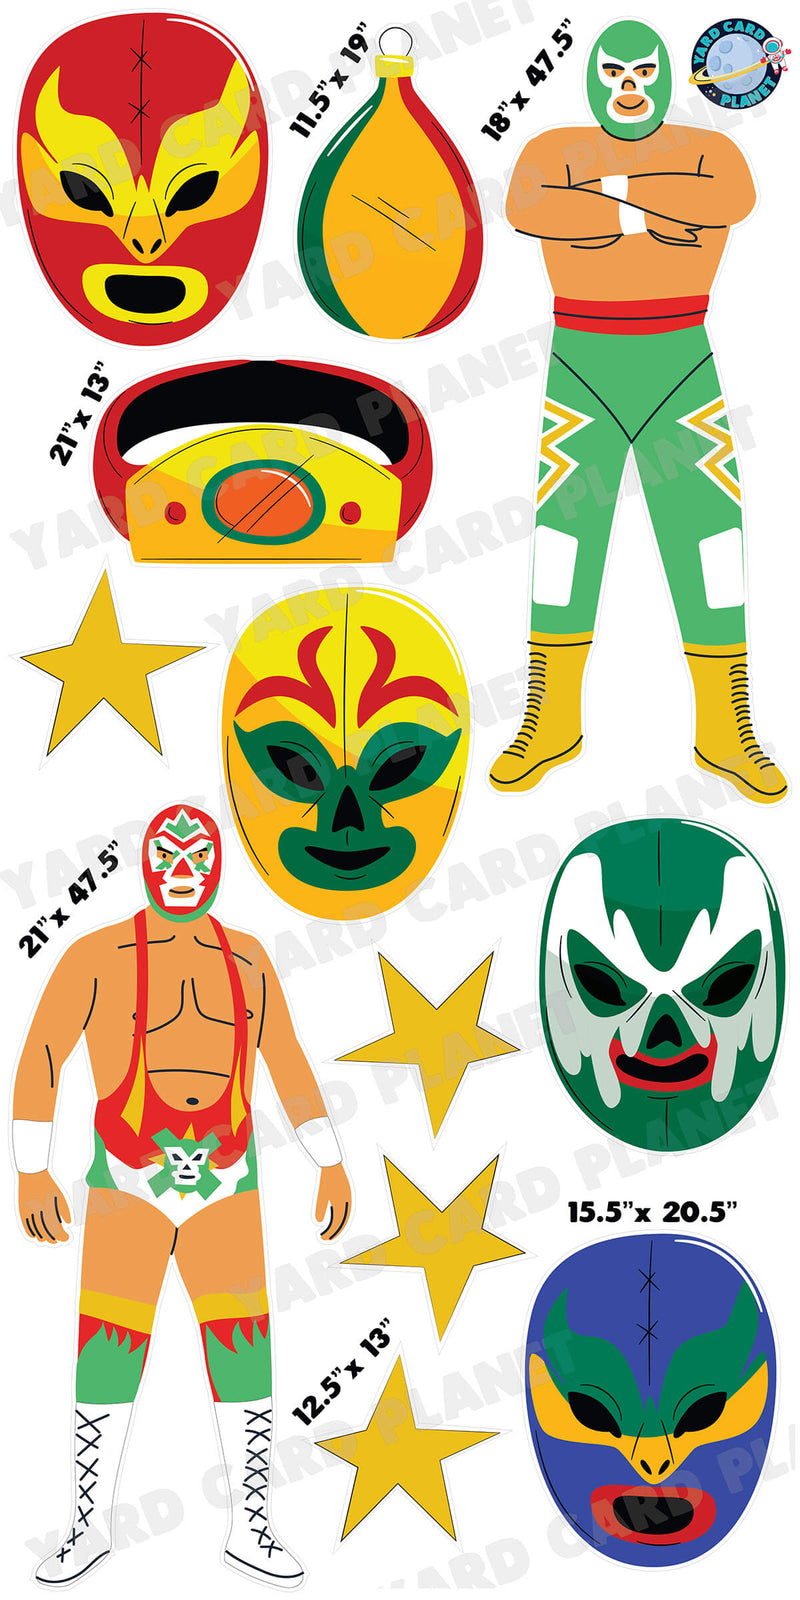 Lucha Libre Wrestling Yard Card Flair Set with Measurements